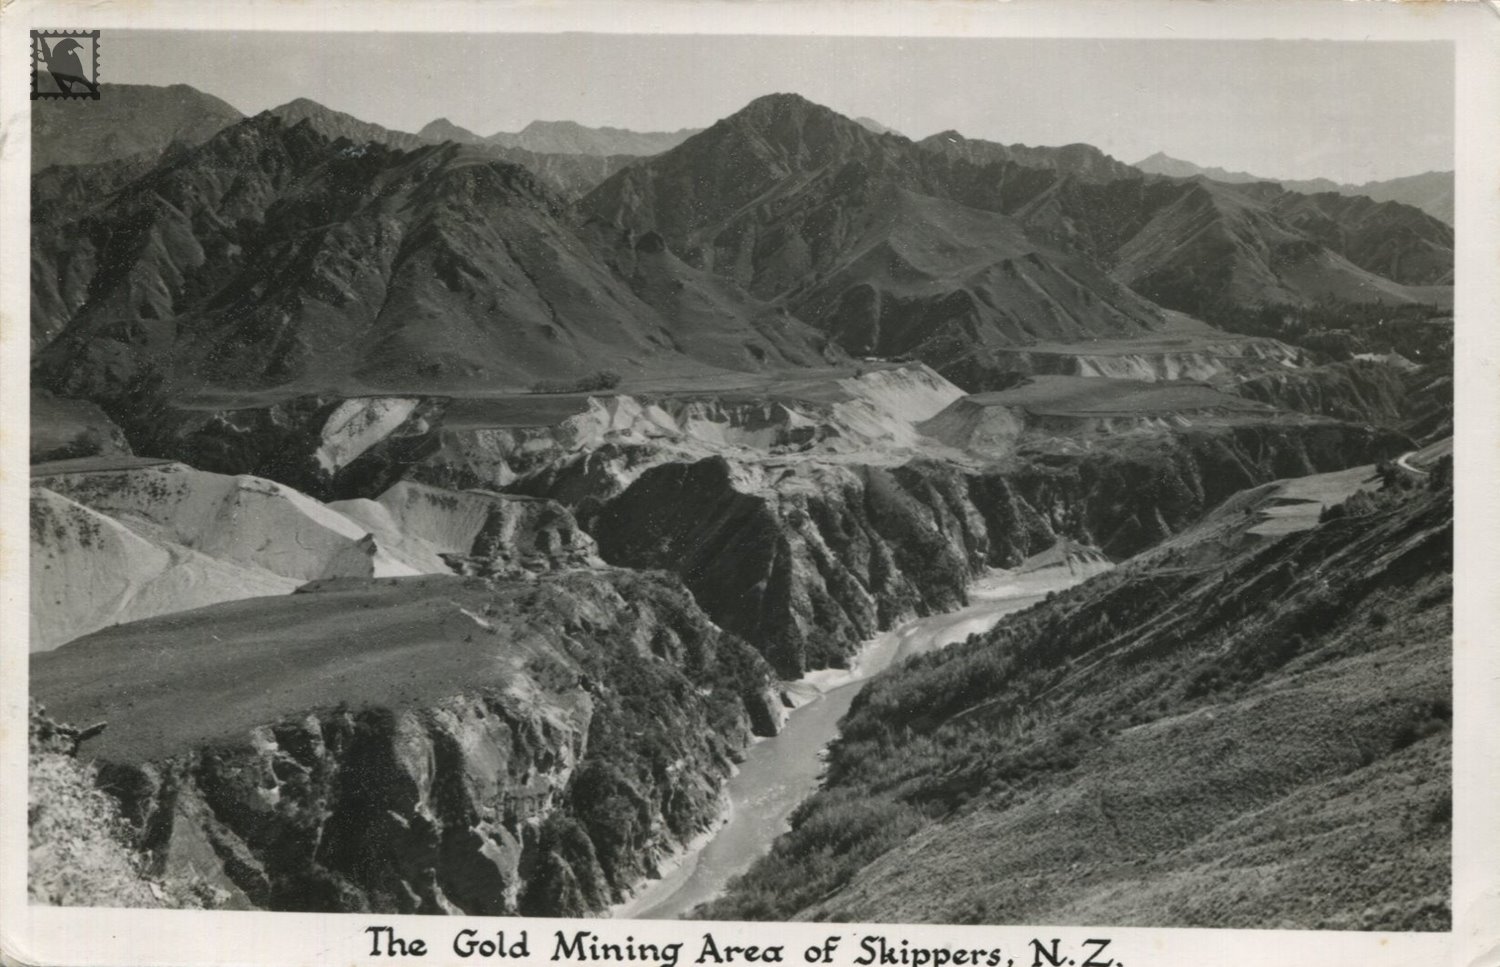 Queenstown-The Gold Mining Area of Skippers